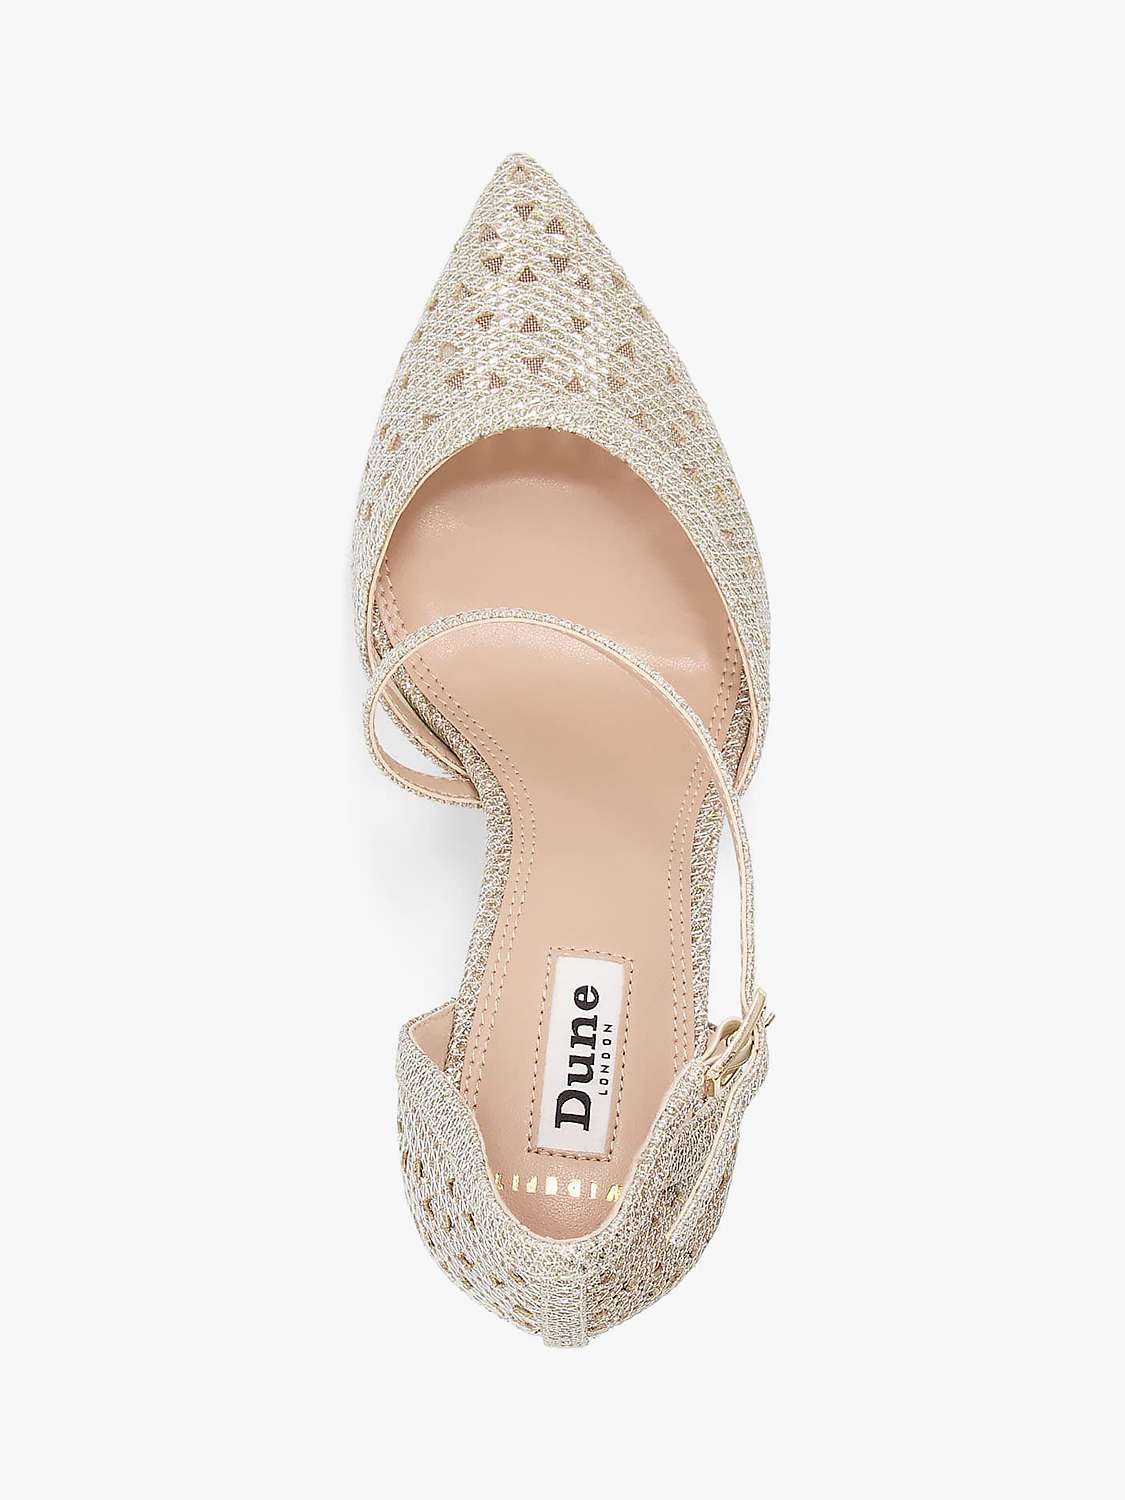 Dune Danae Wide Fit Pointed High Heels, Gold at John Lewis & Partners